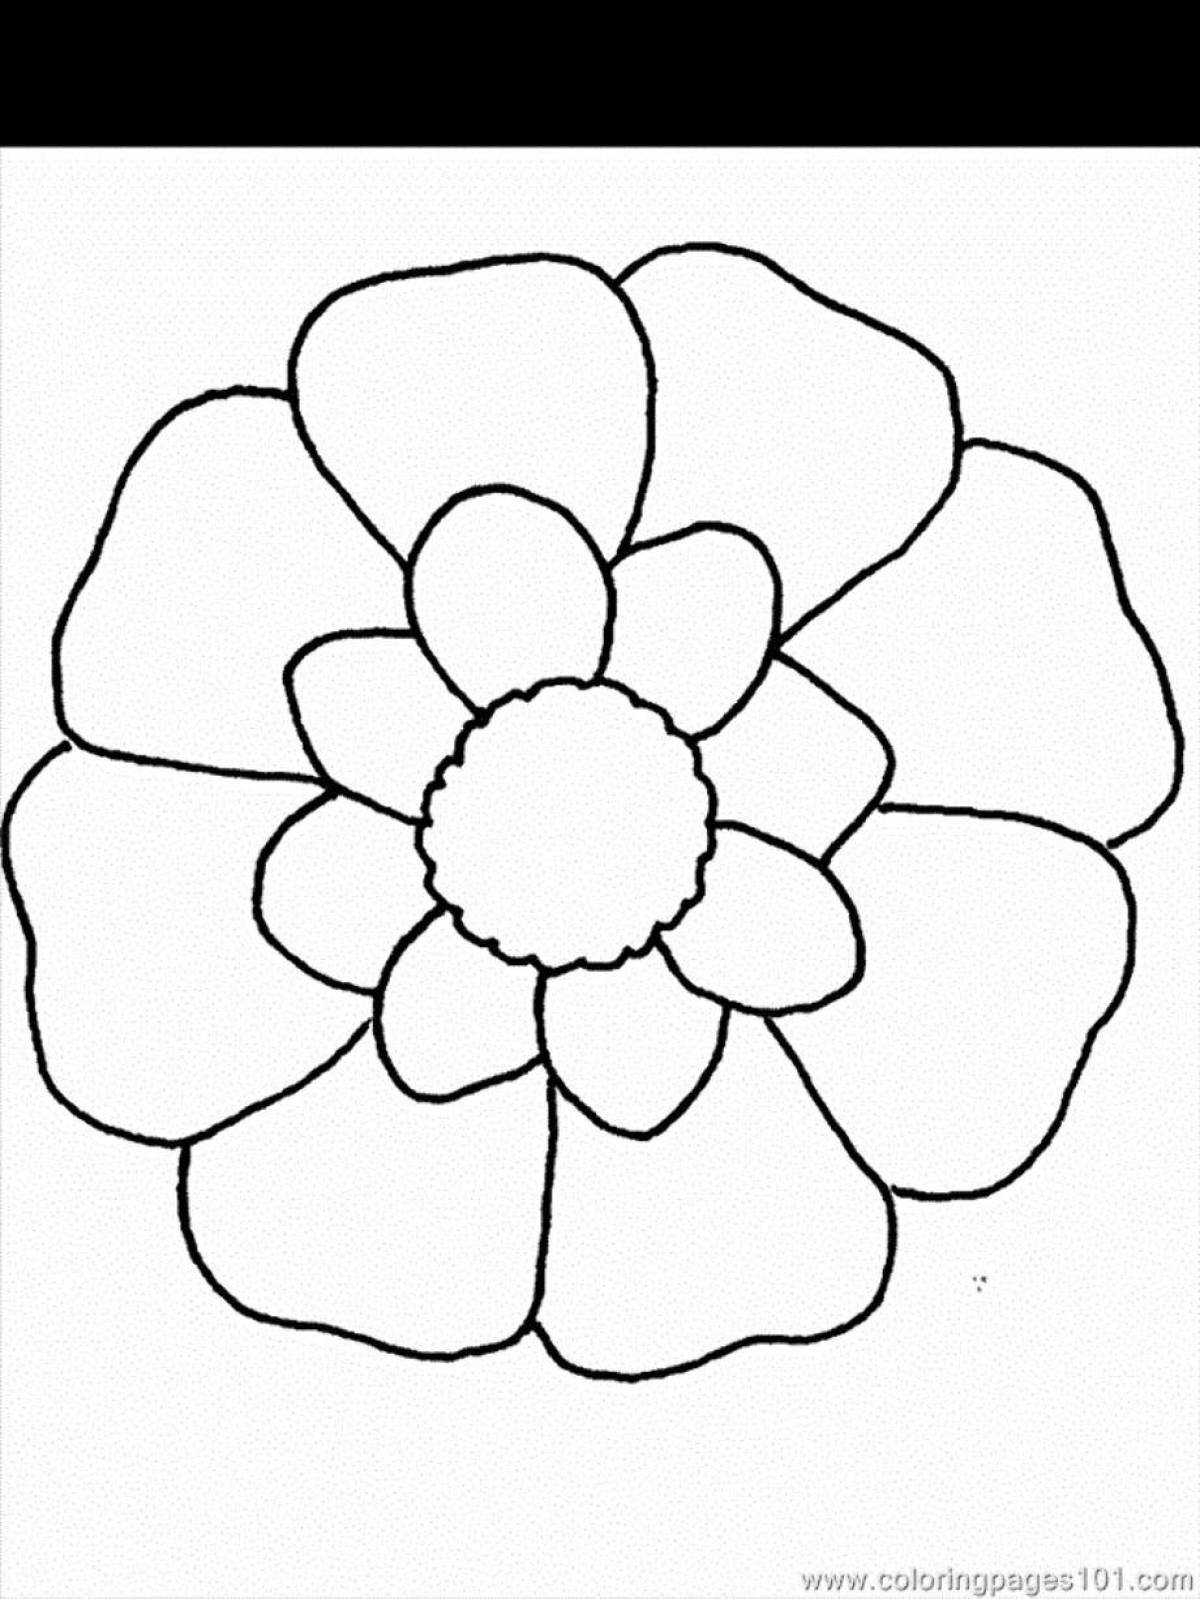 Exquisite flower pattern for kids